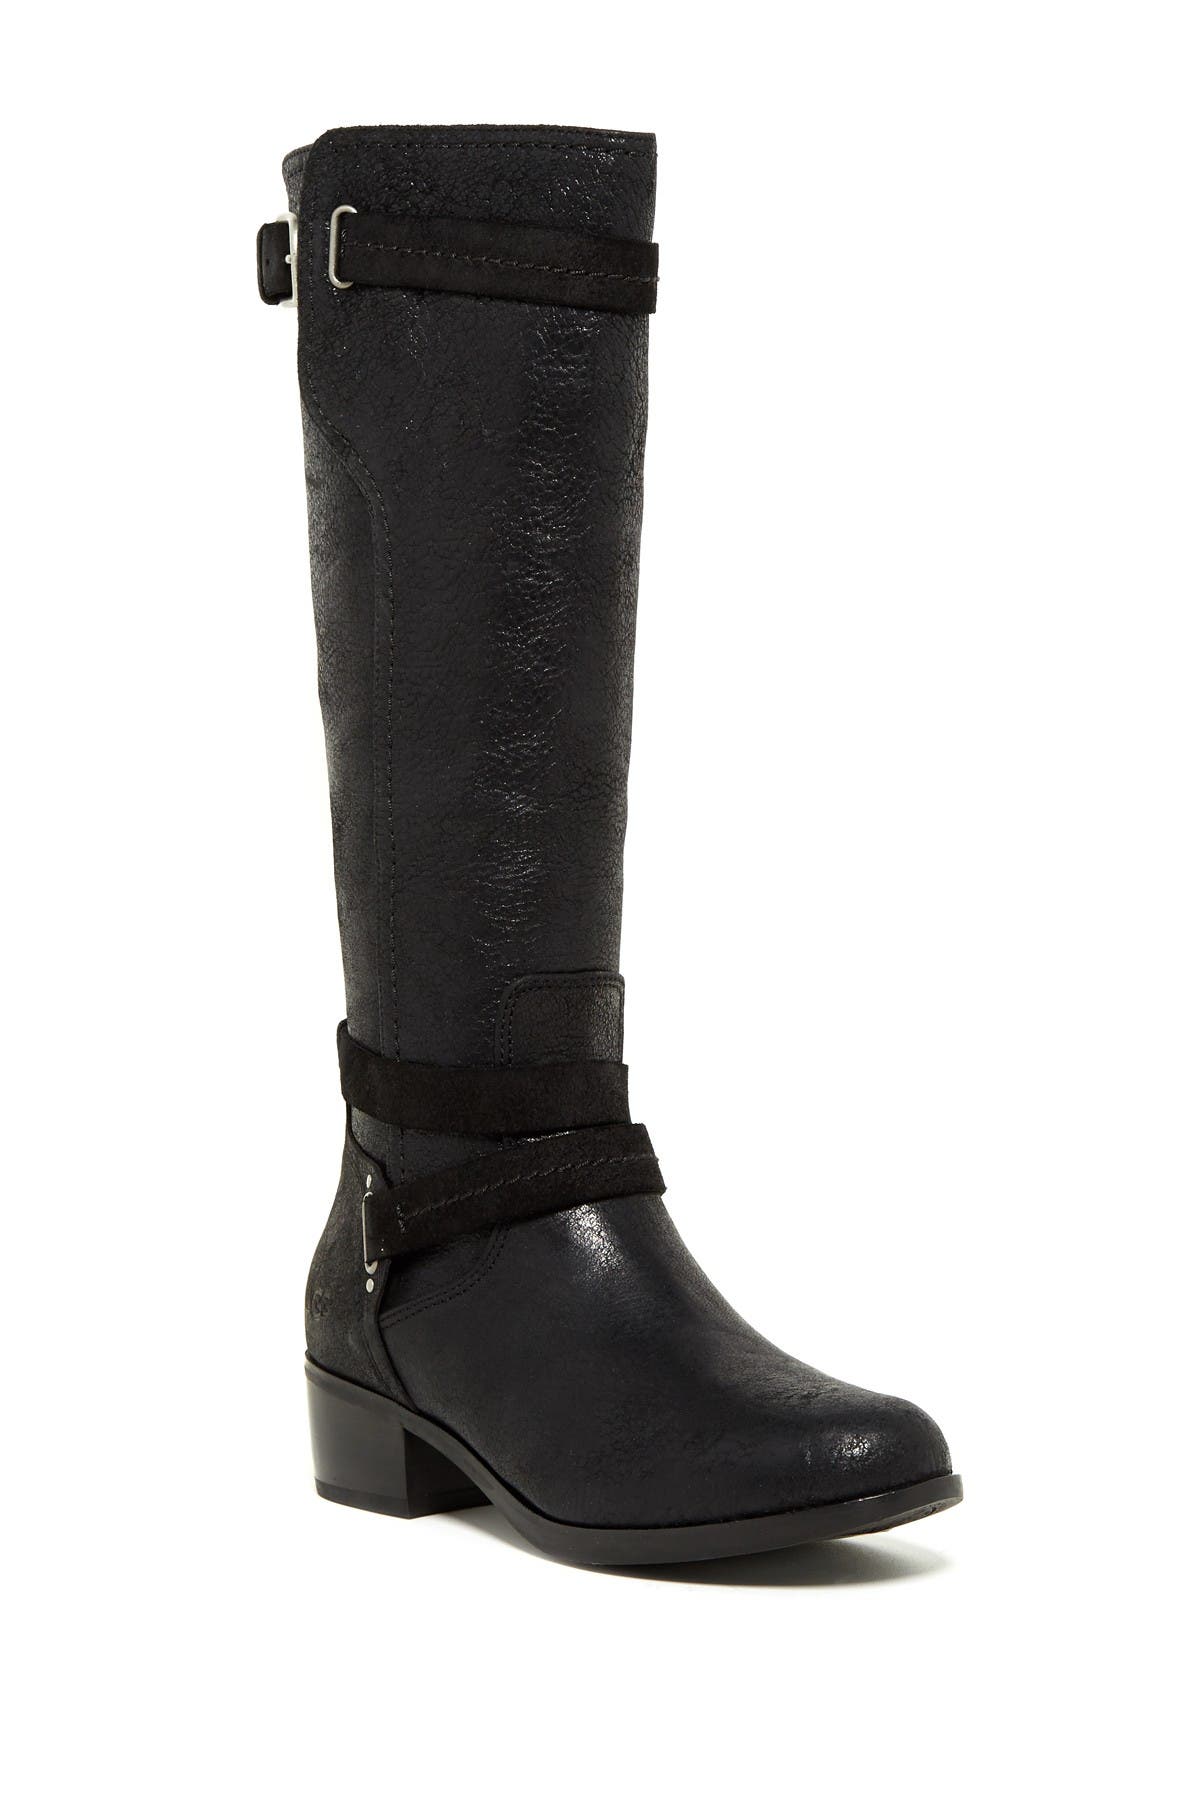 ugg leather riding boots